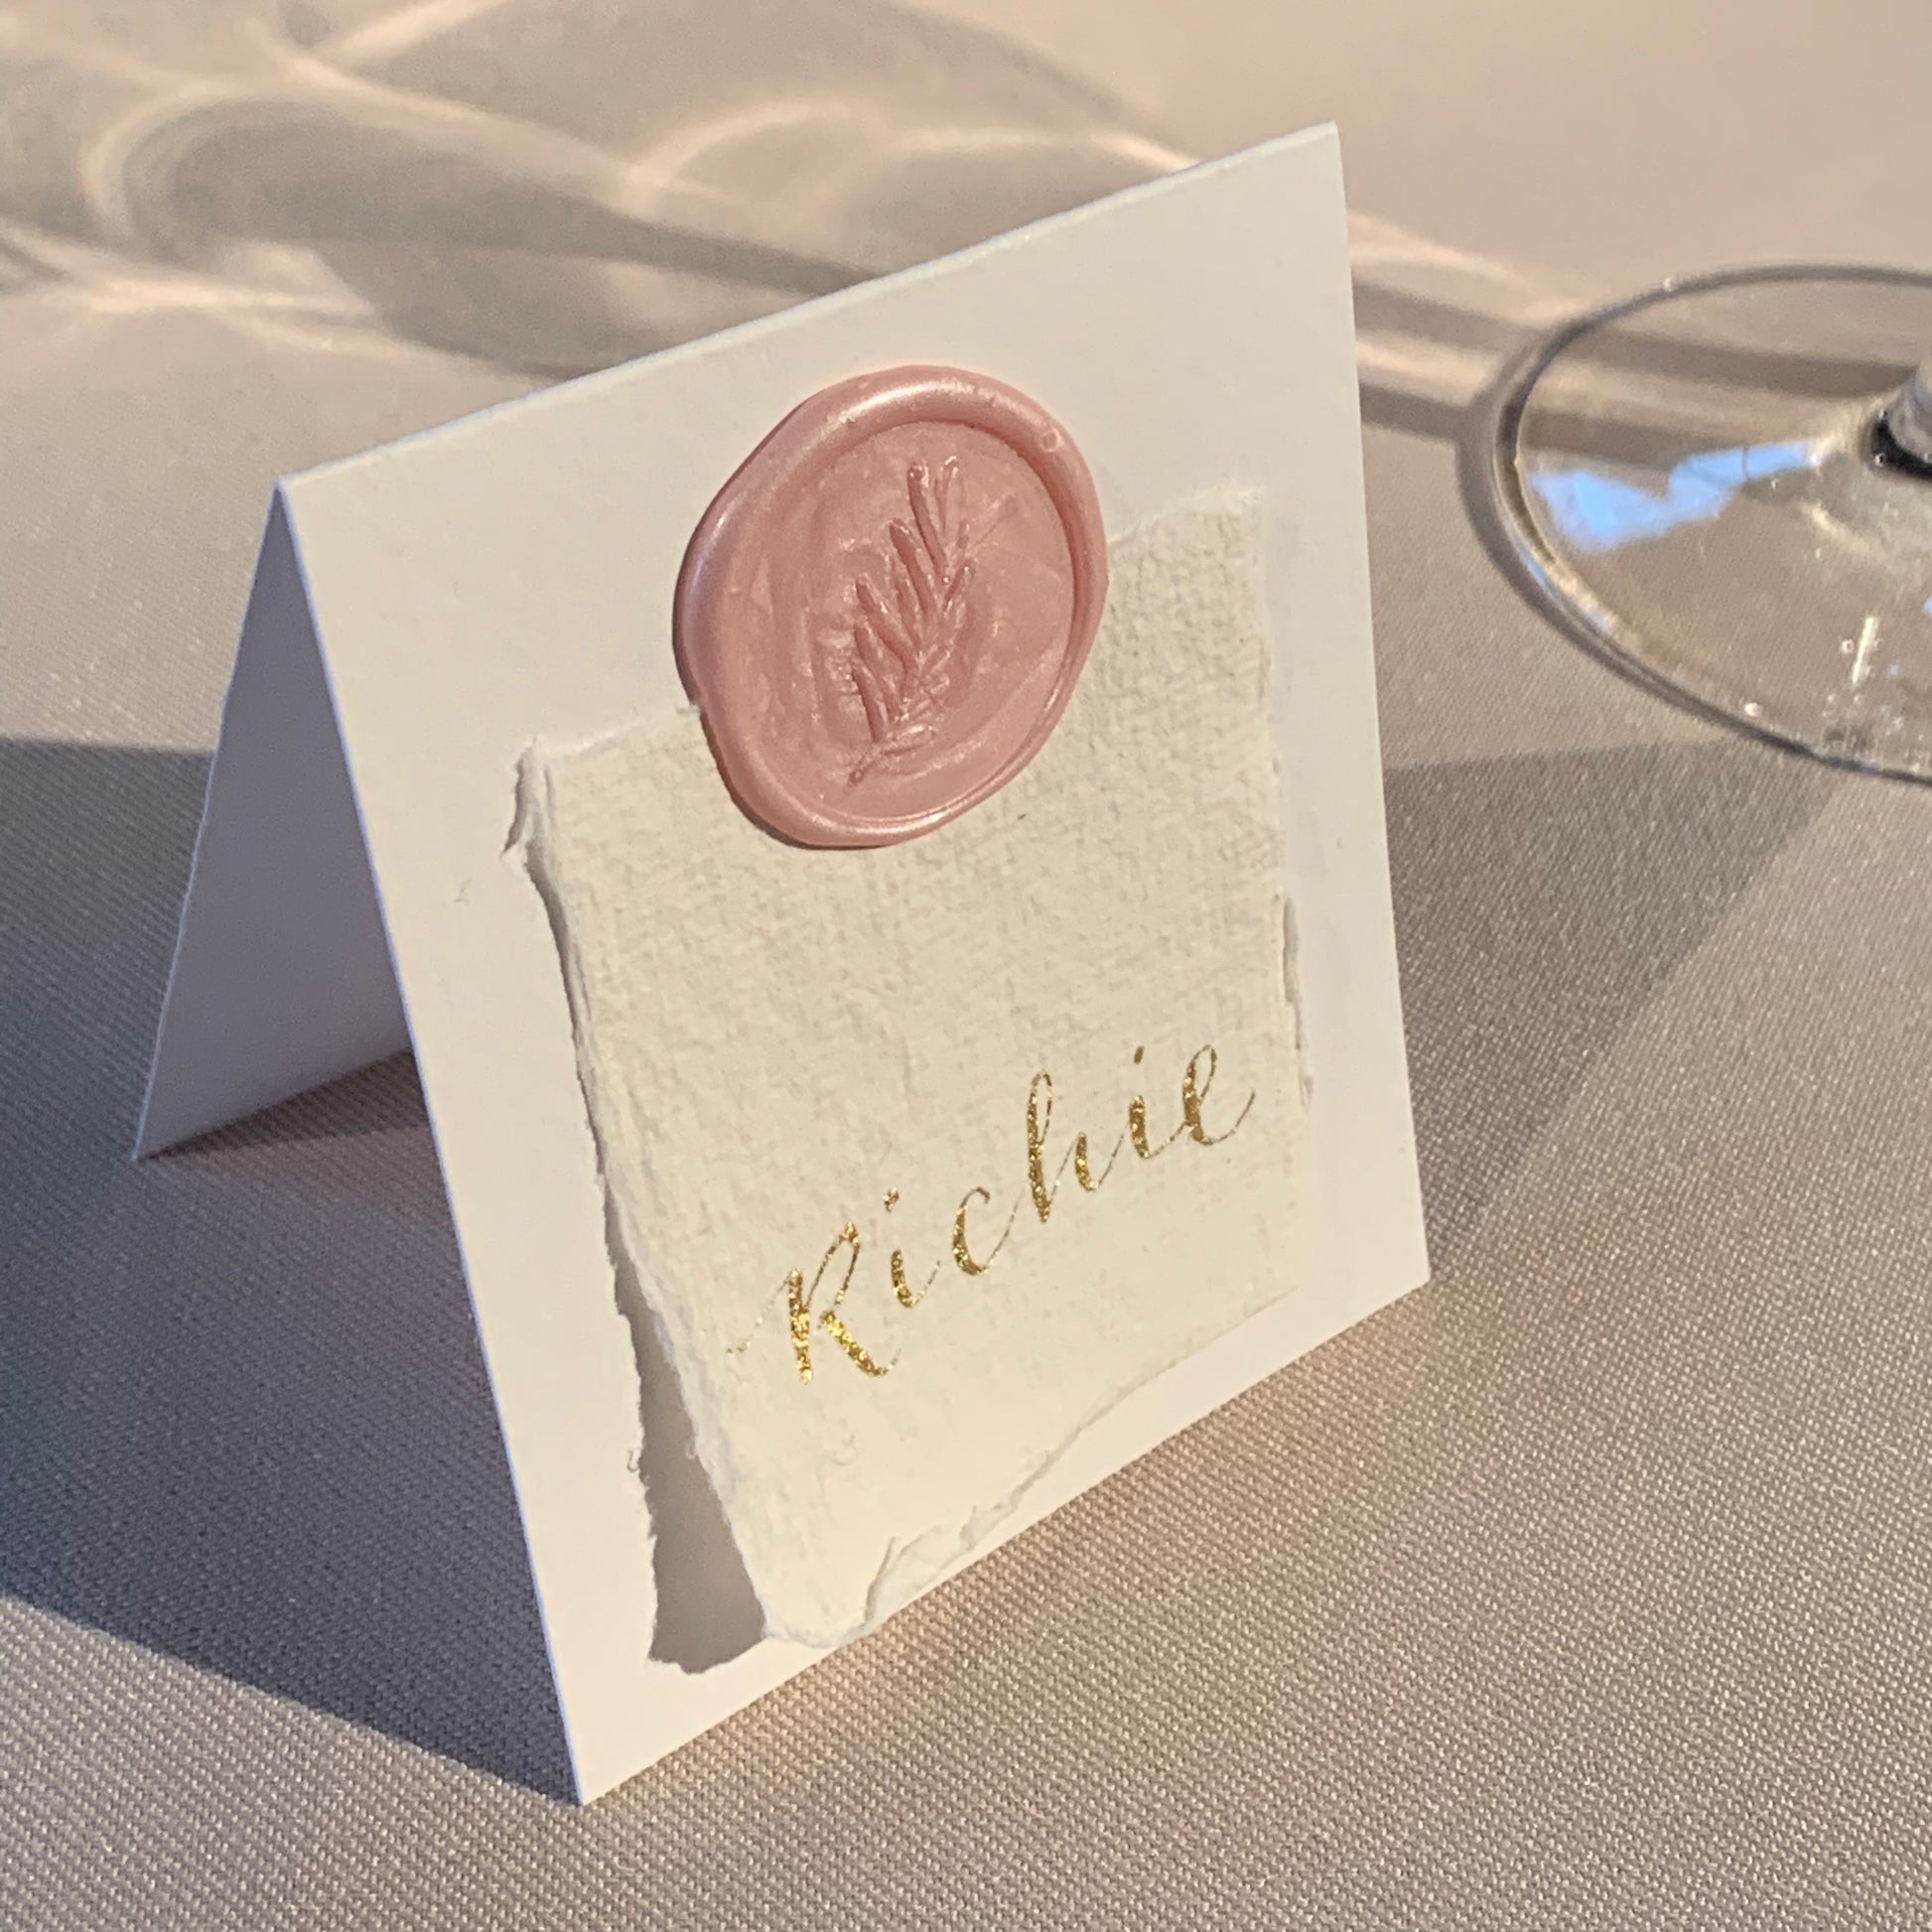 elegant place card, guest name written on cotton paper in gold ink, attached to place card with pink wax seal